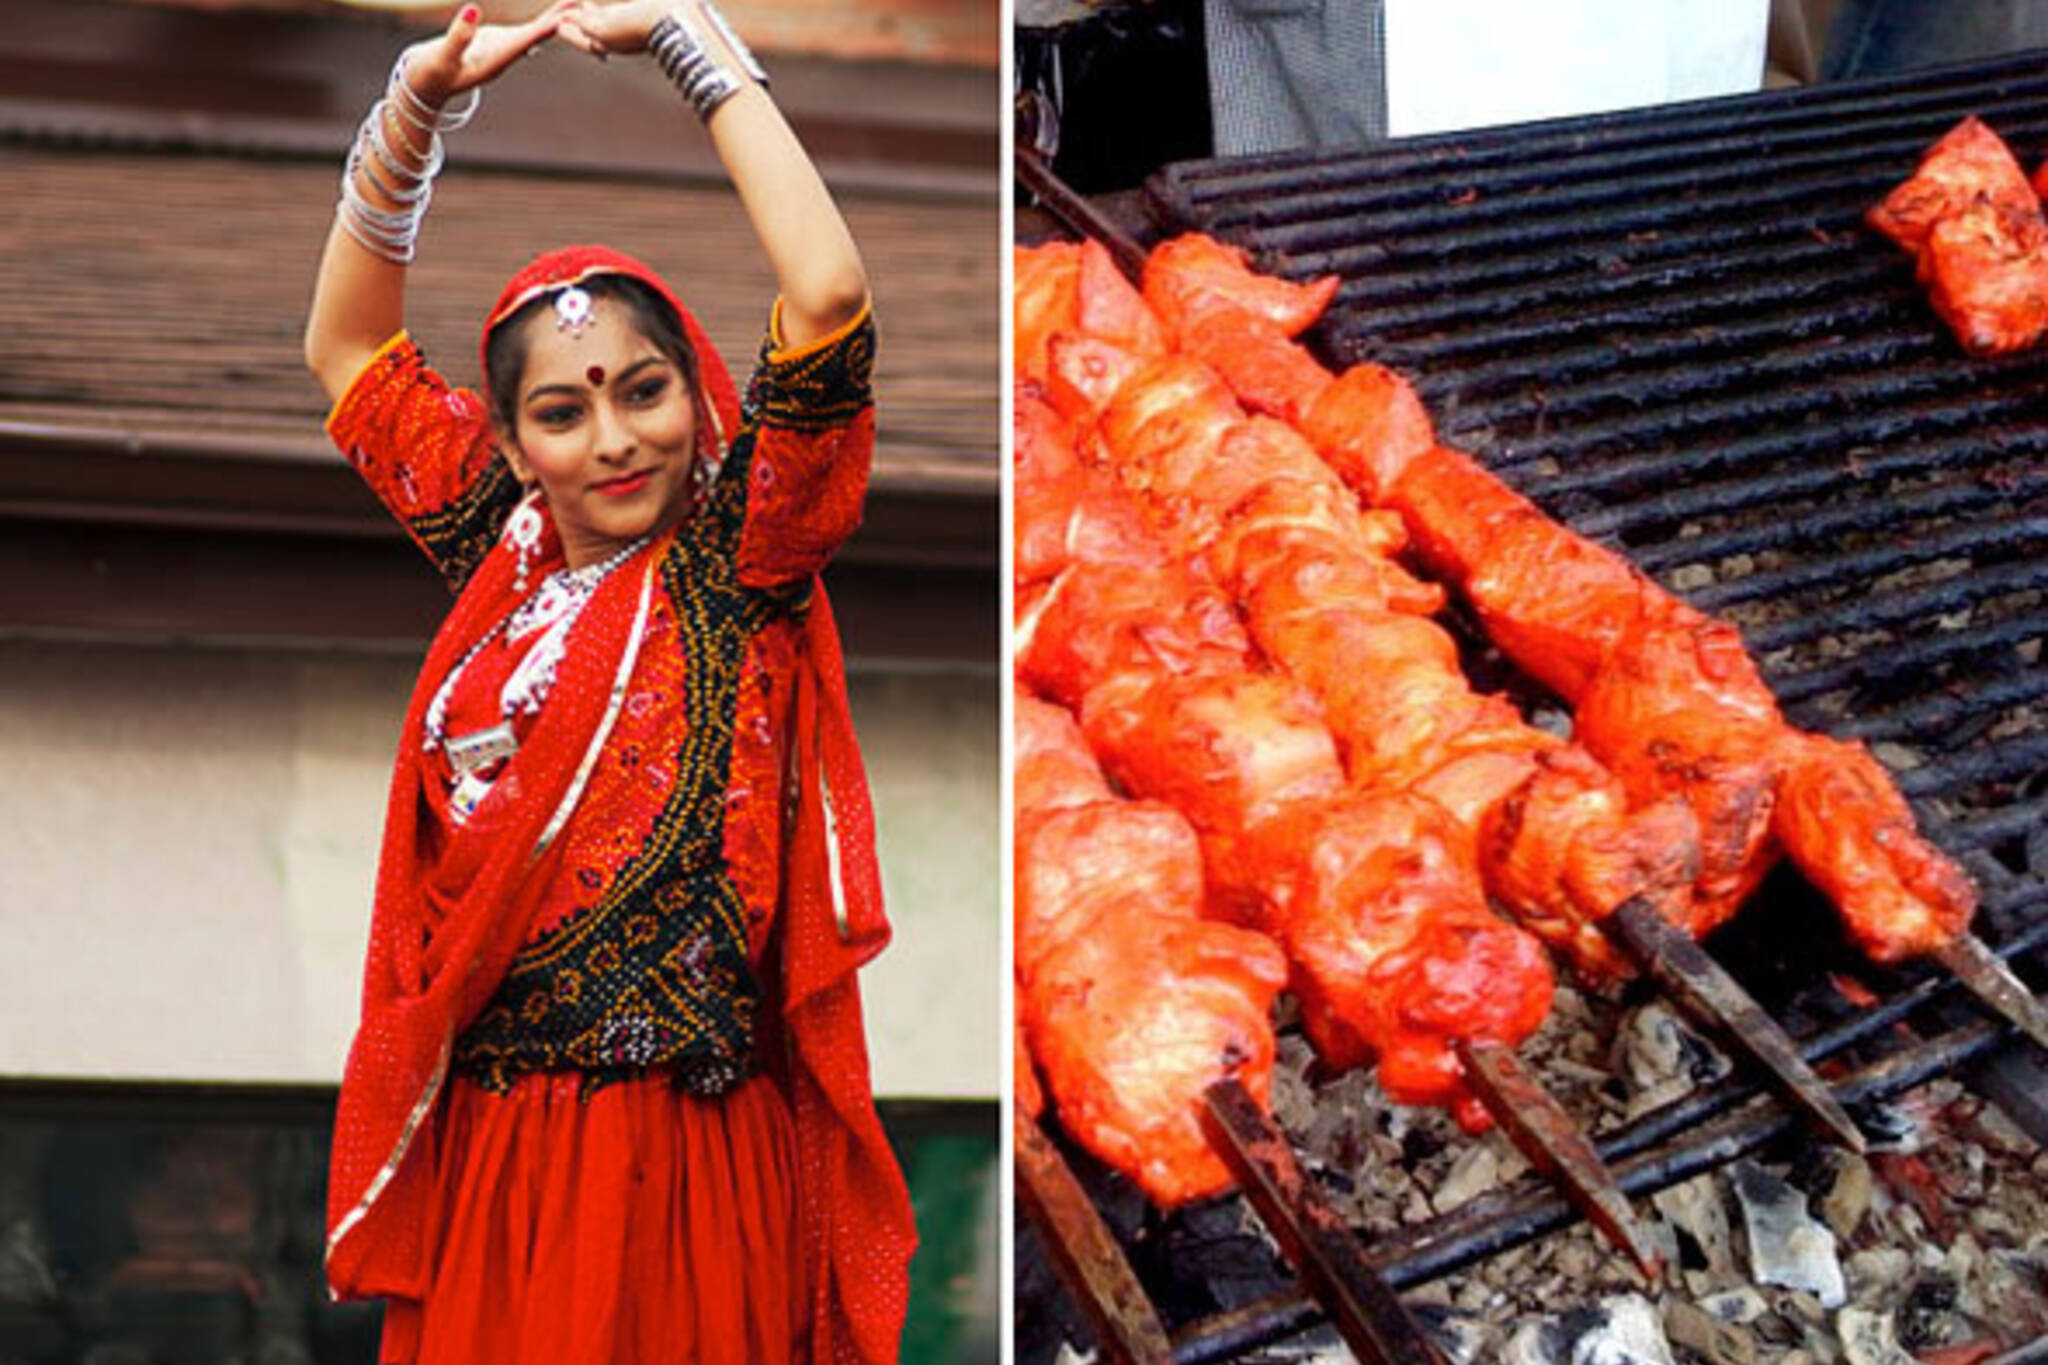 Bollywood and Tikka at the Festival of South Asia on Gerrard